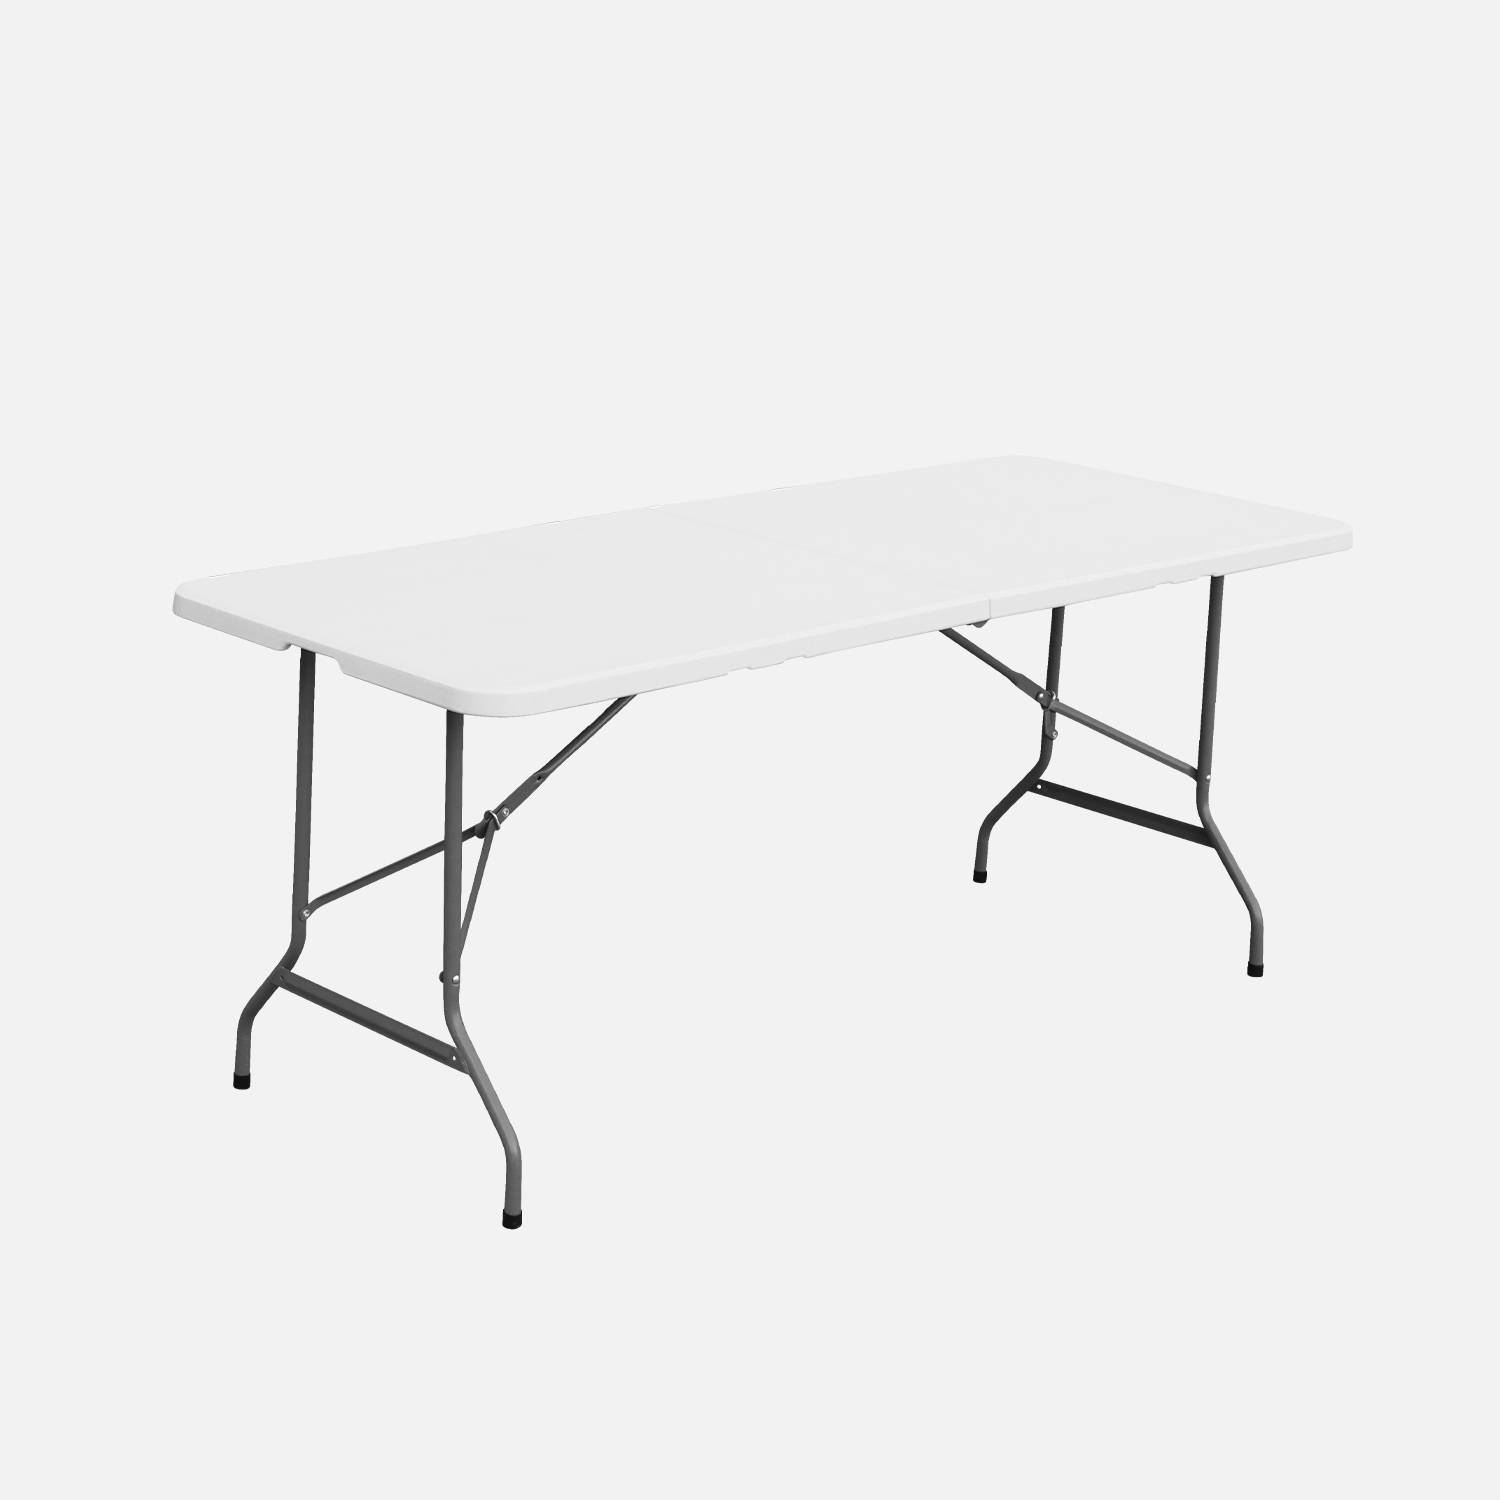 Set of 2 reception tables, 180cm, foldable, with carrying handle Photo5